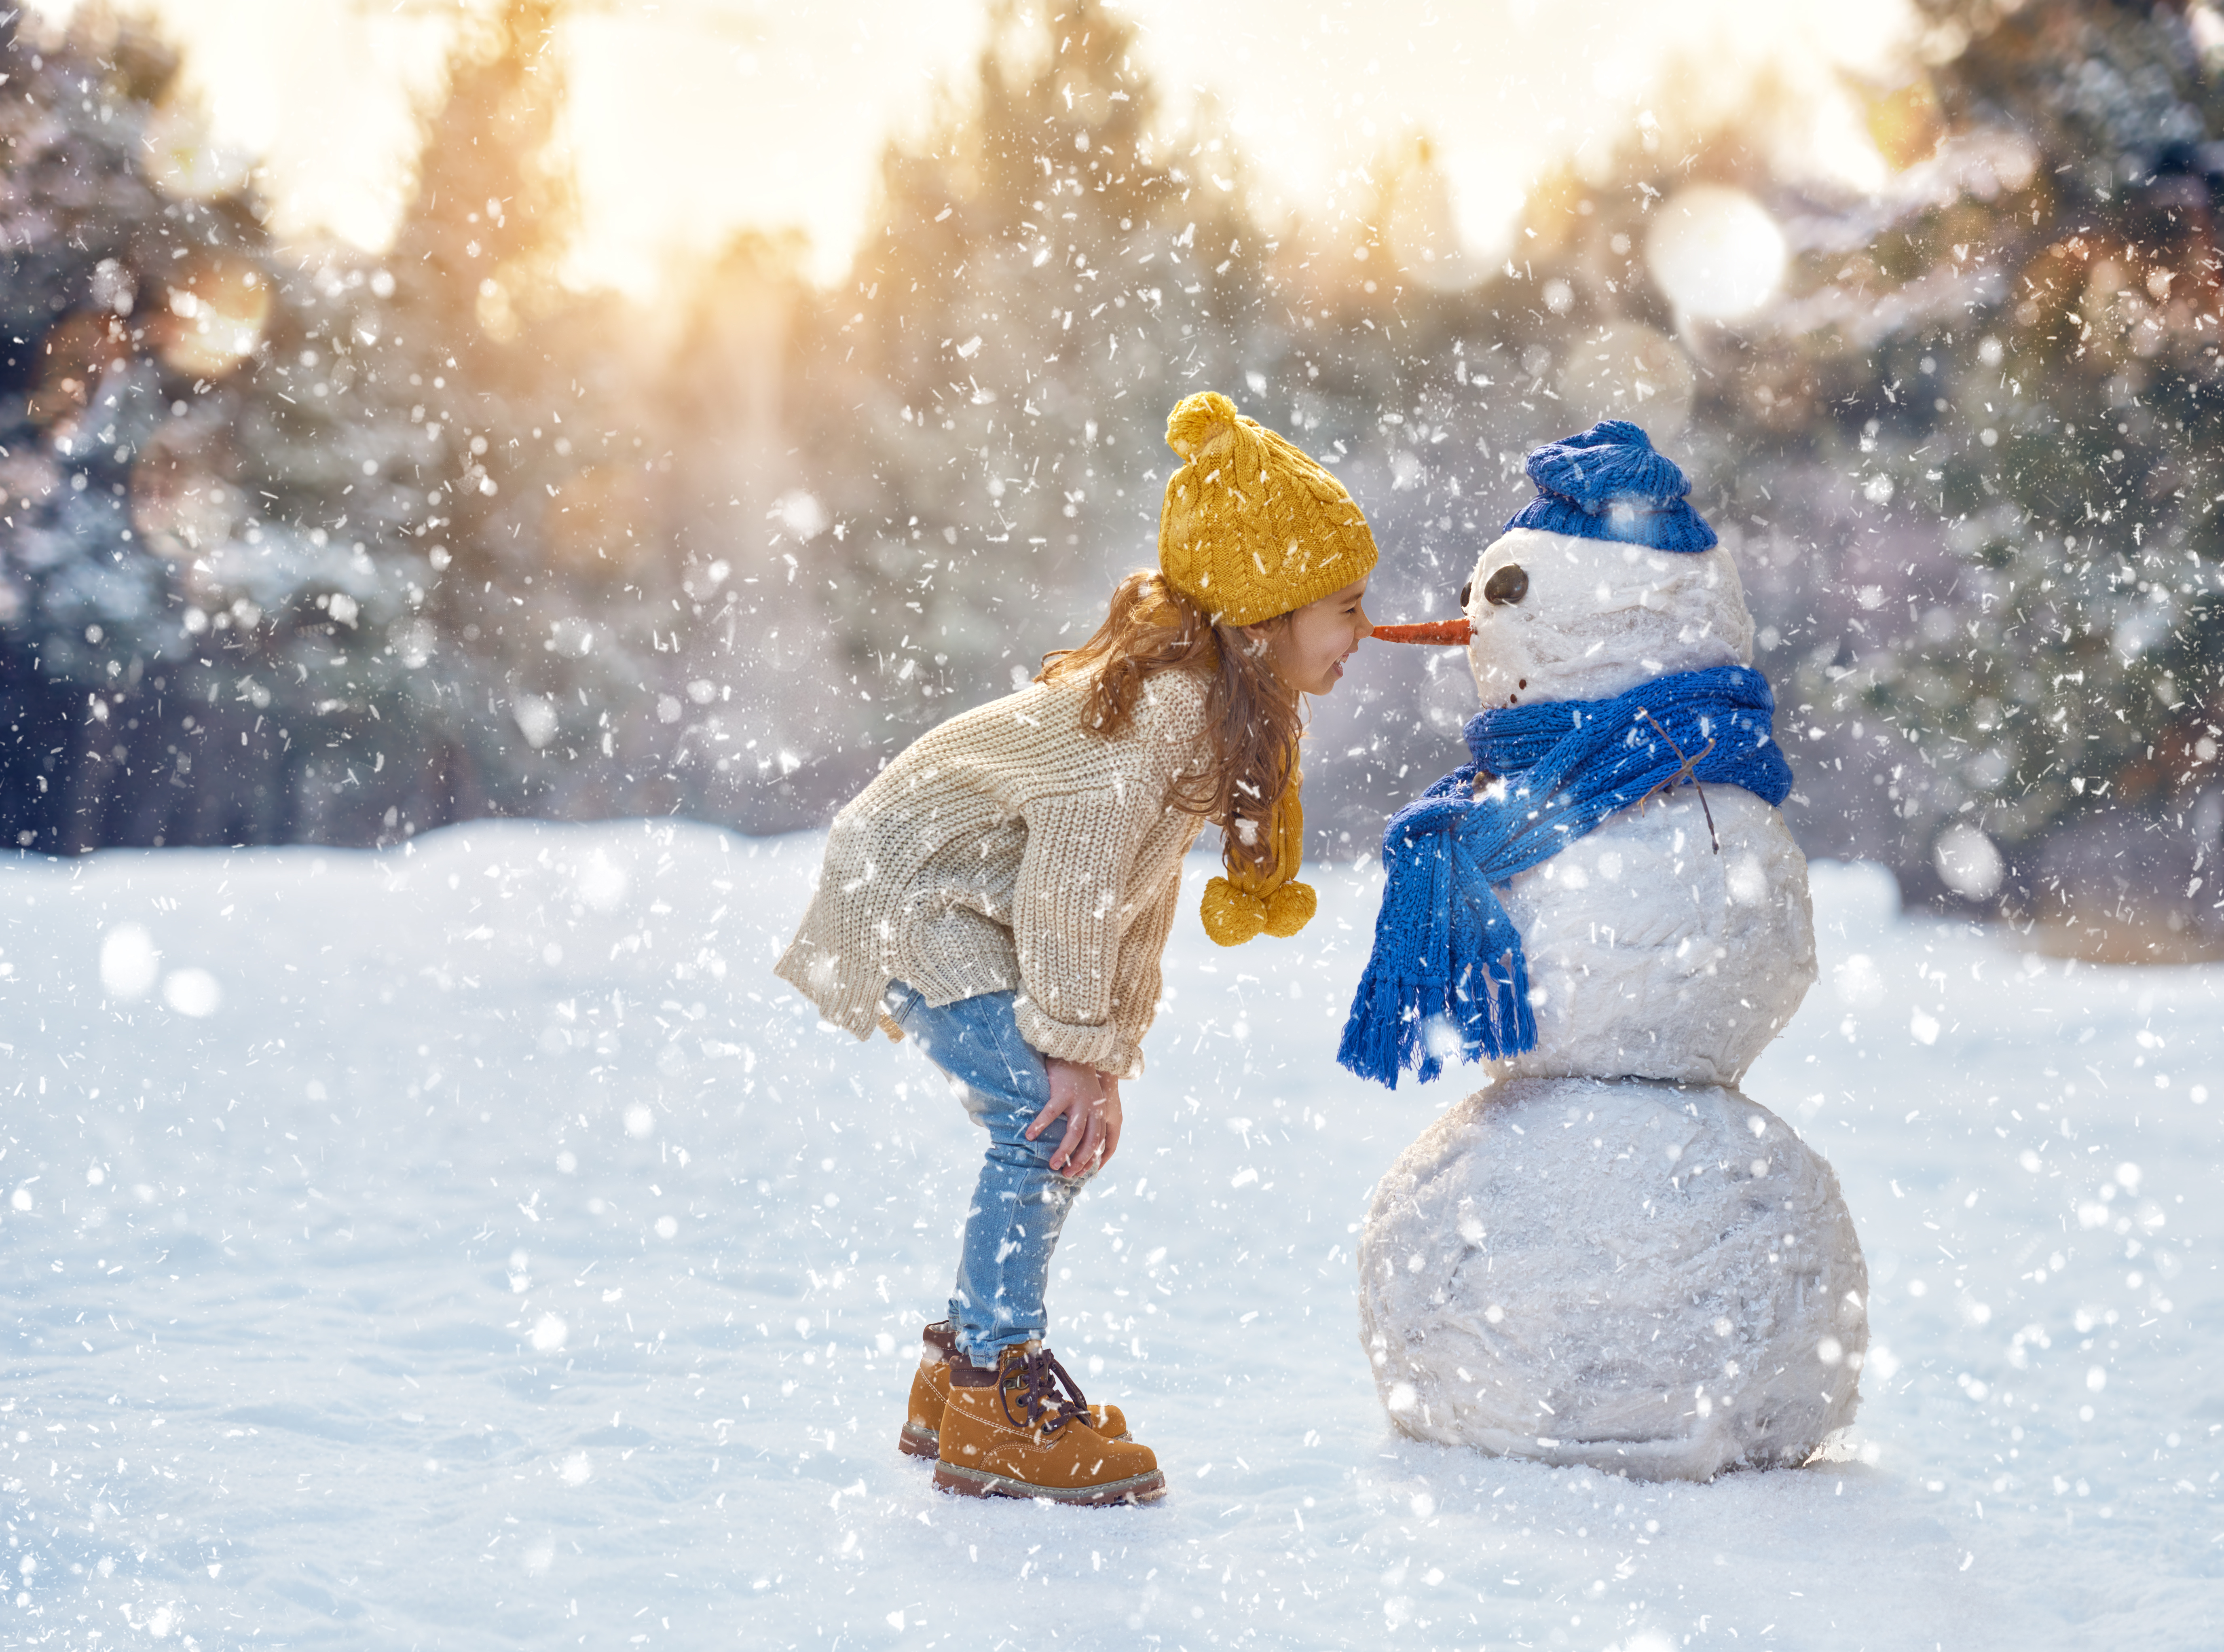 Girl playing with a snowman on a snowy winter path